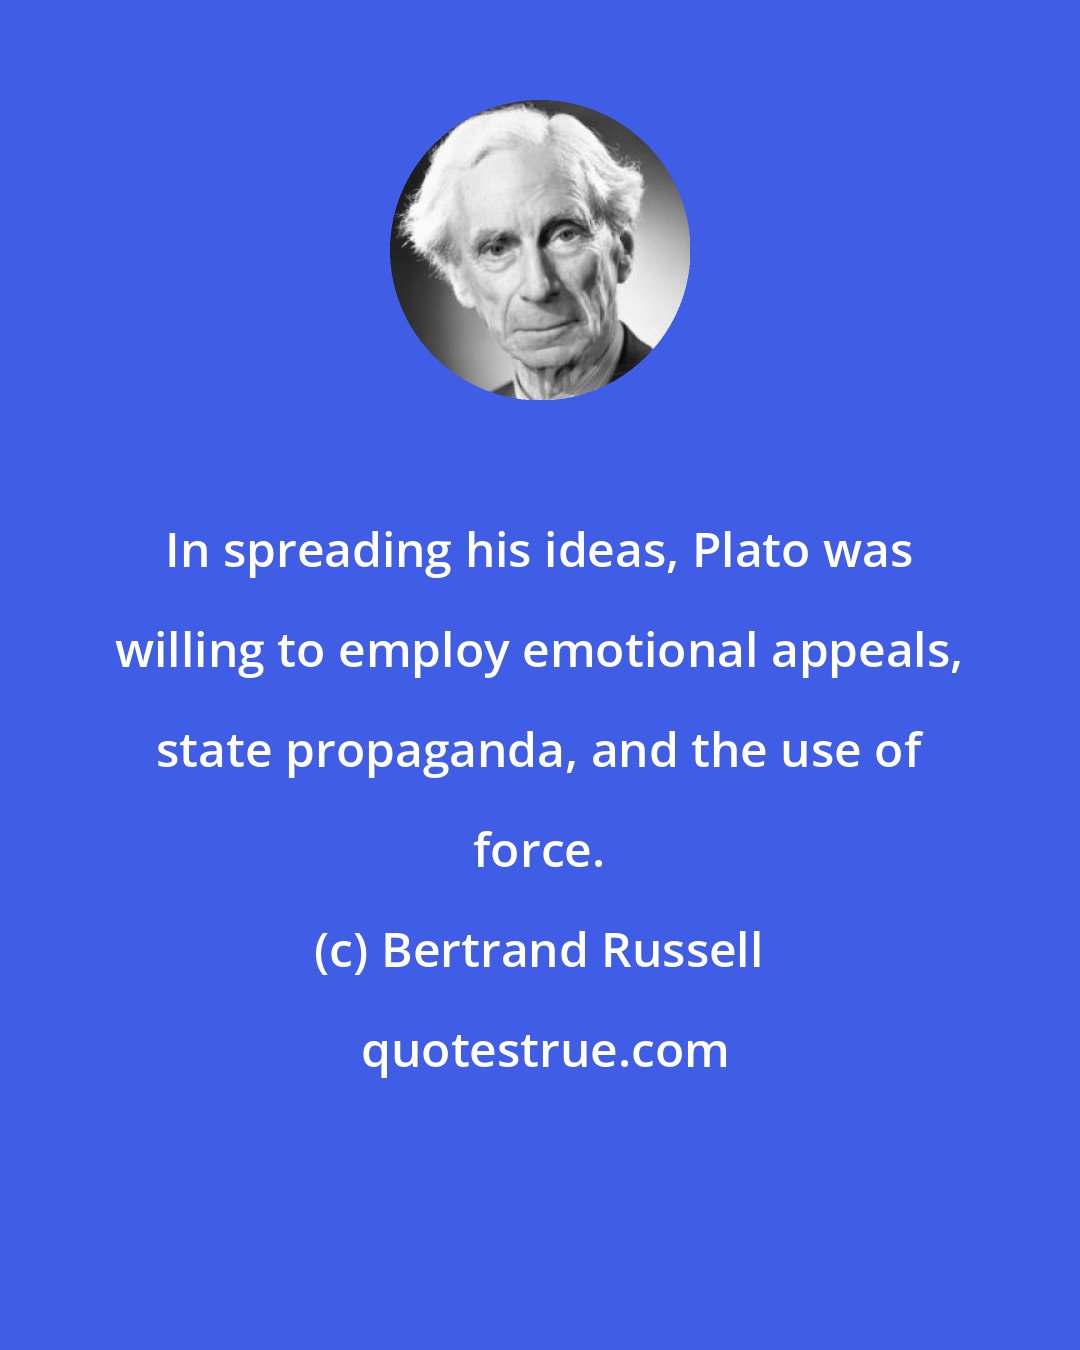 Bertrand Russell: In spreading his ideas, Plato was willing to employ emotional appeals, state propaganda, and the use of force.